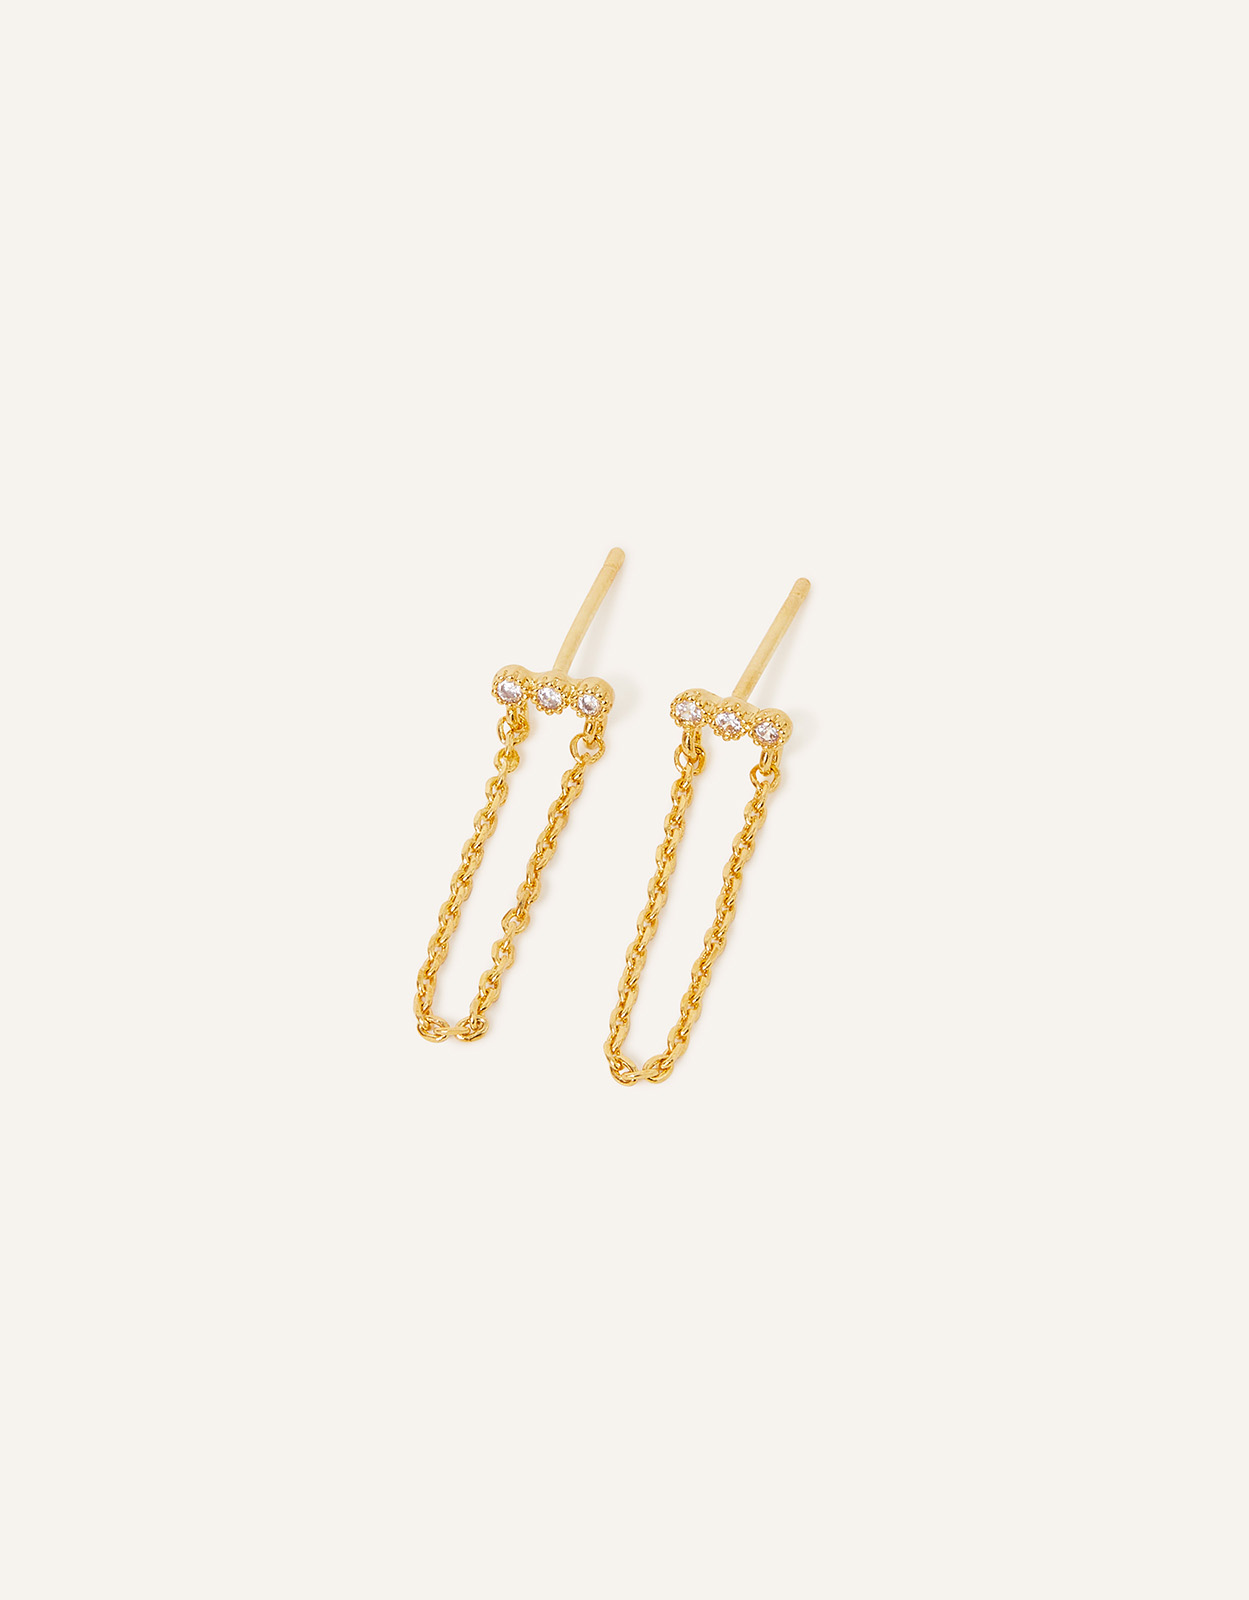 Accessorize Women's 14ct Gold-Plated Triple Sparkle Chain Earrings